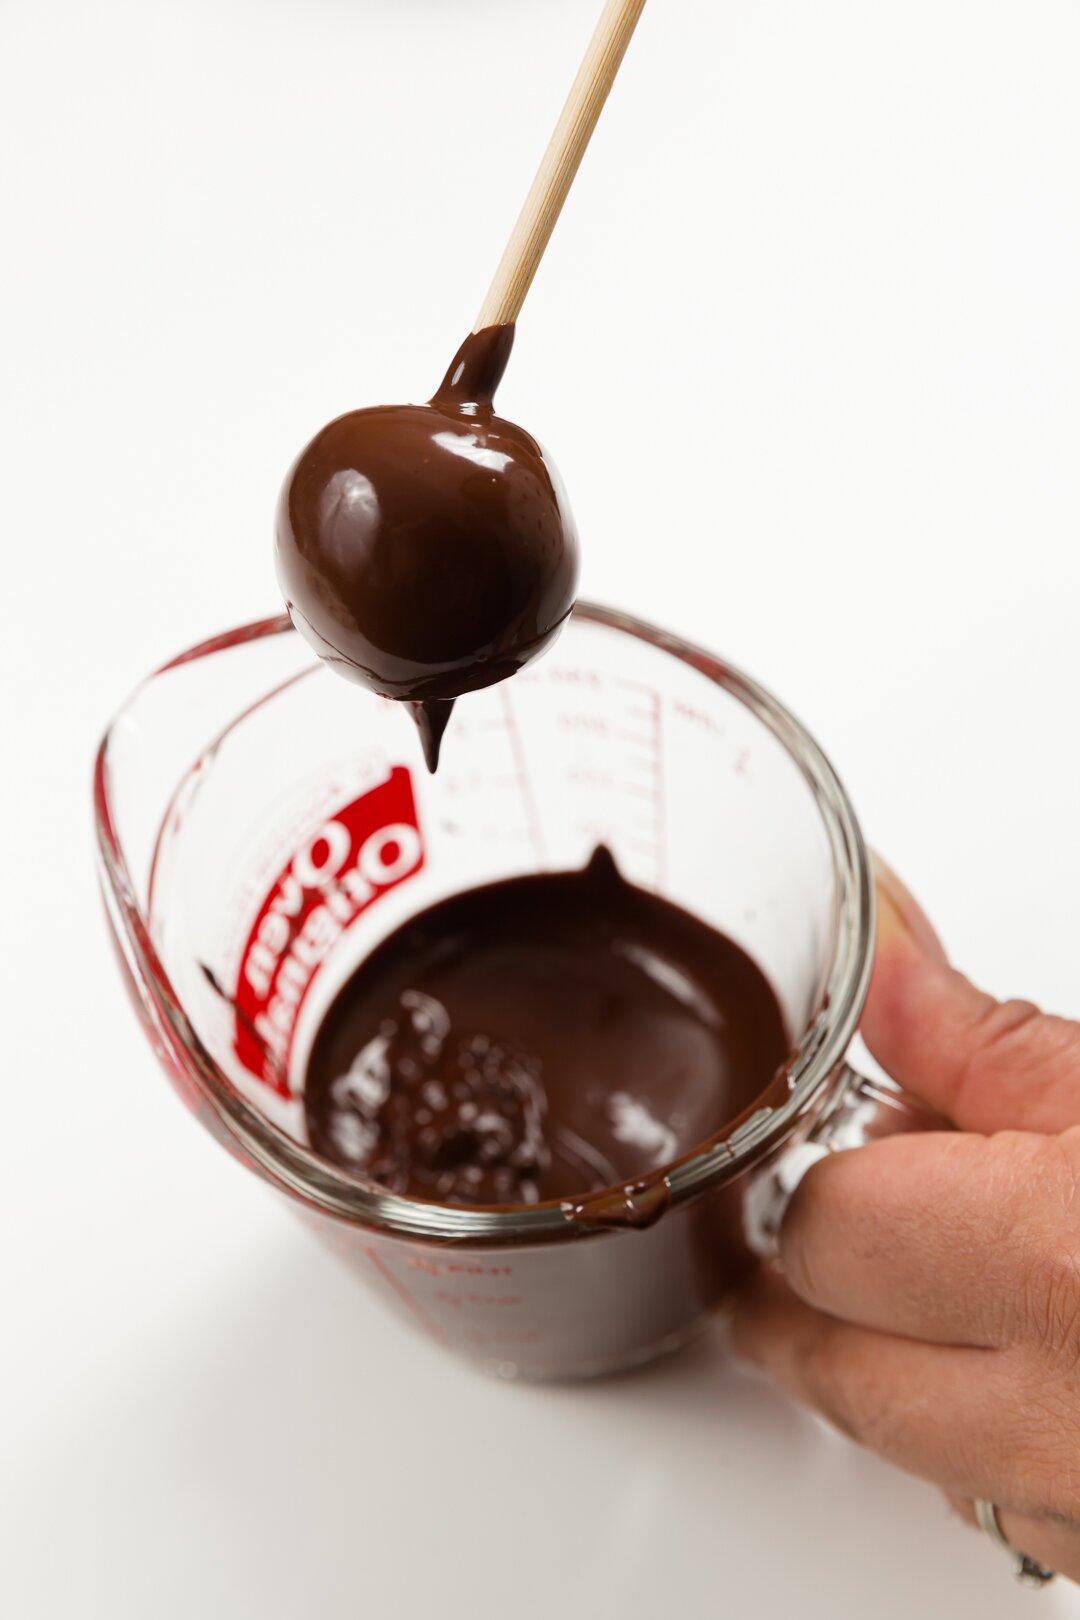 Dipping cake ball into chocolate